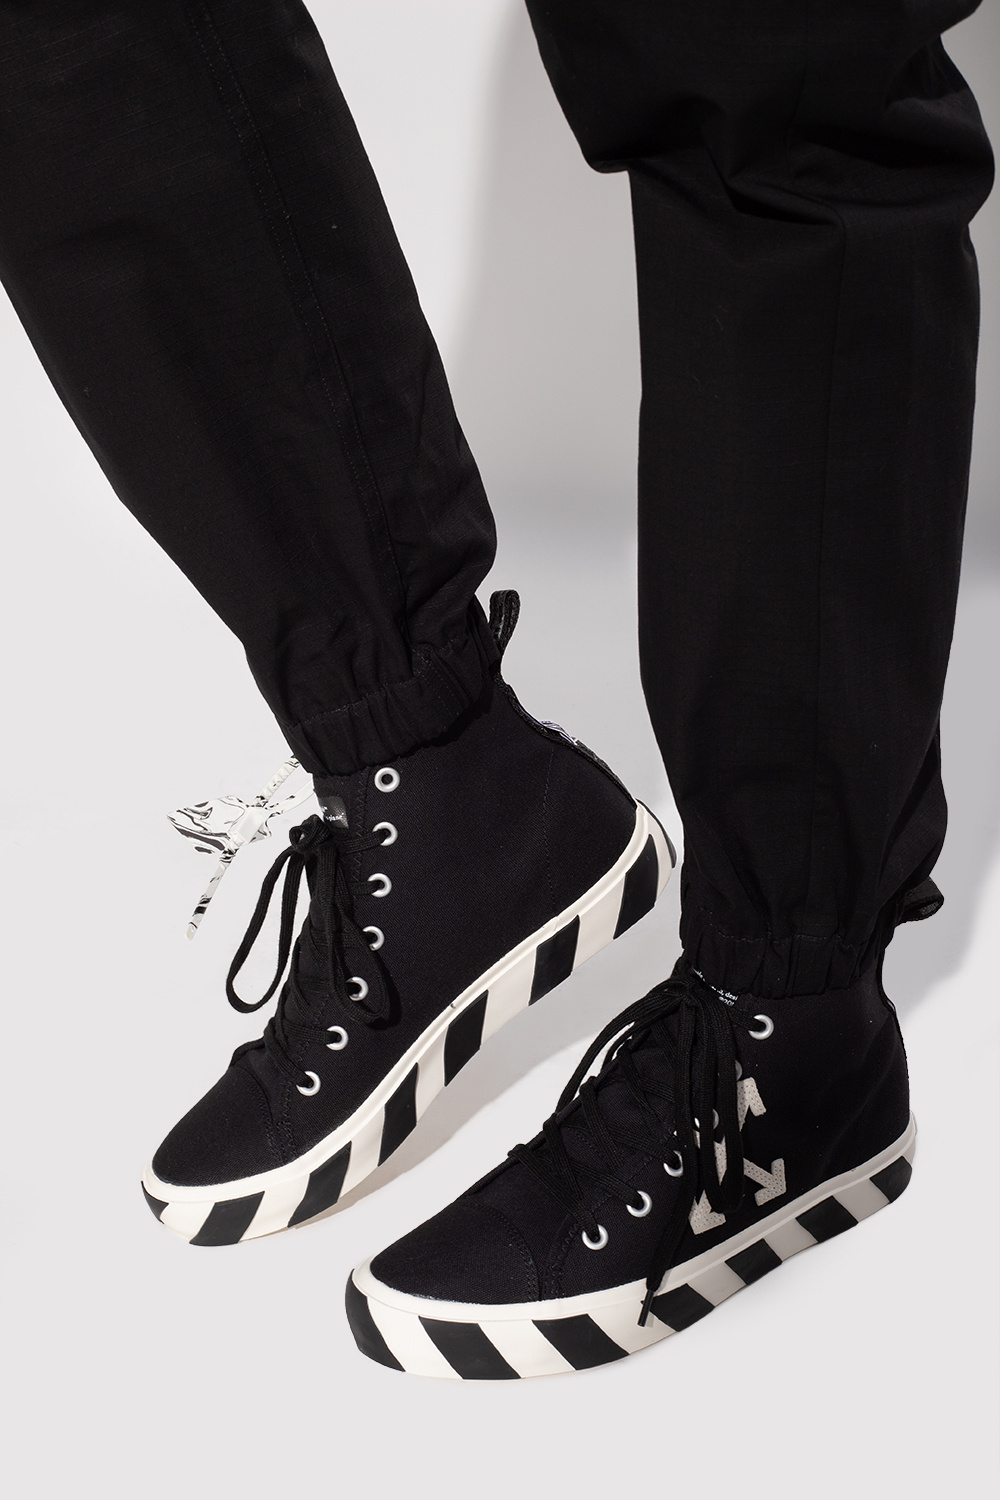 off white vulcanized high top sneakers